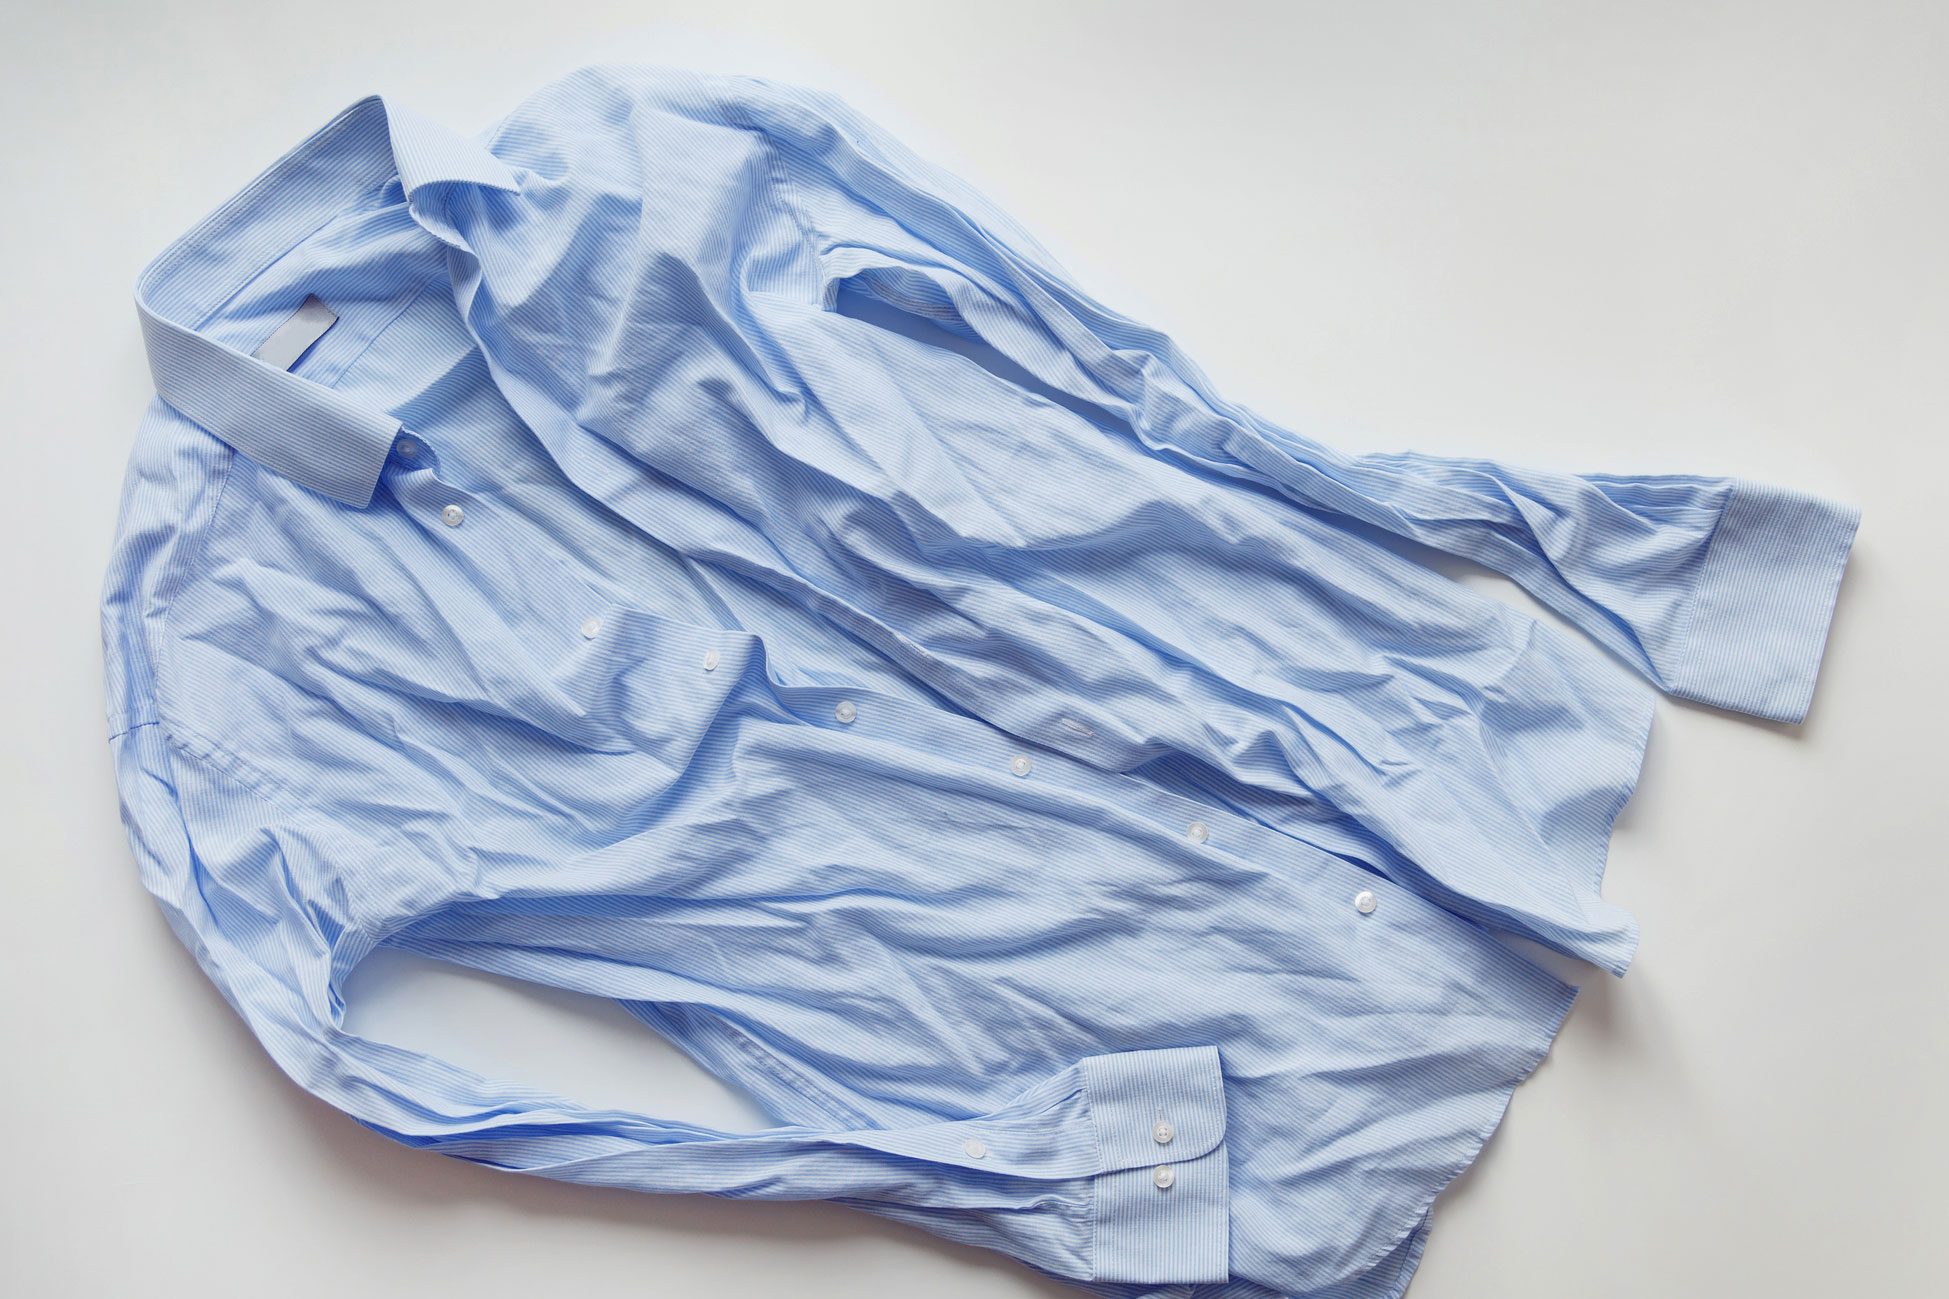 10 Surprising Ways to Get Wrinkles Out of Clothes Without an Iron